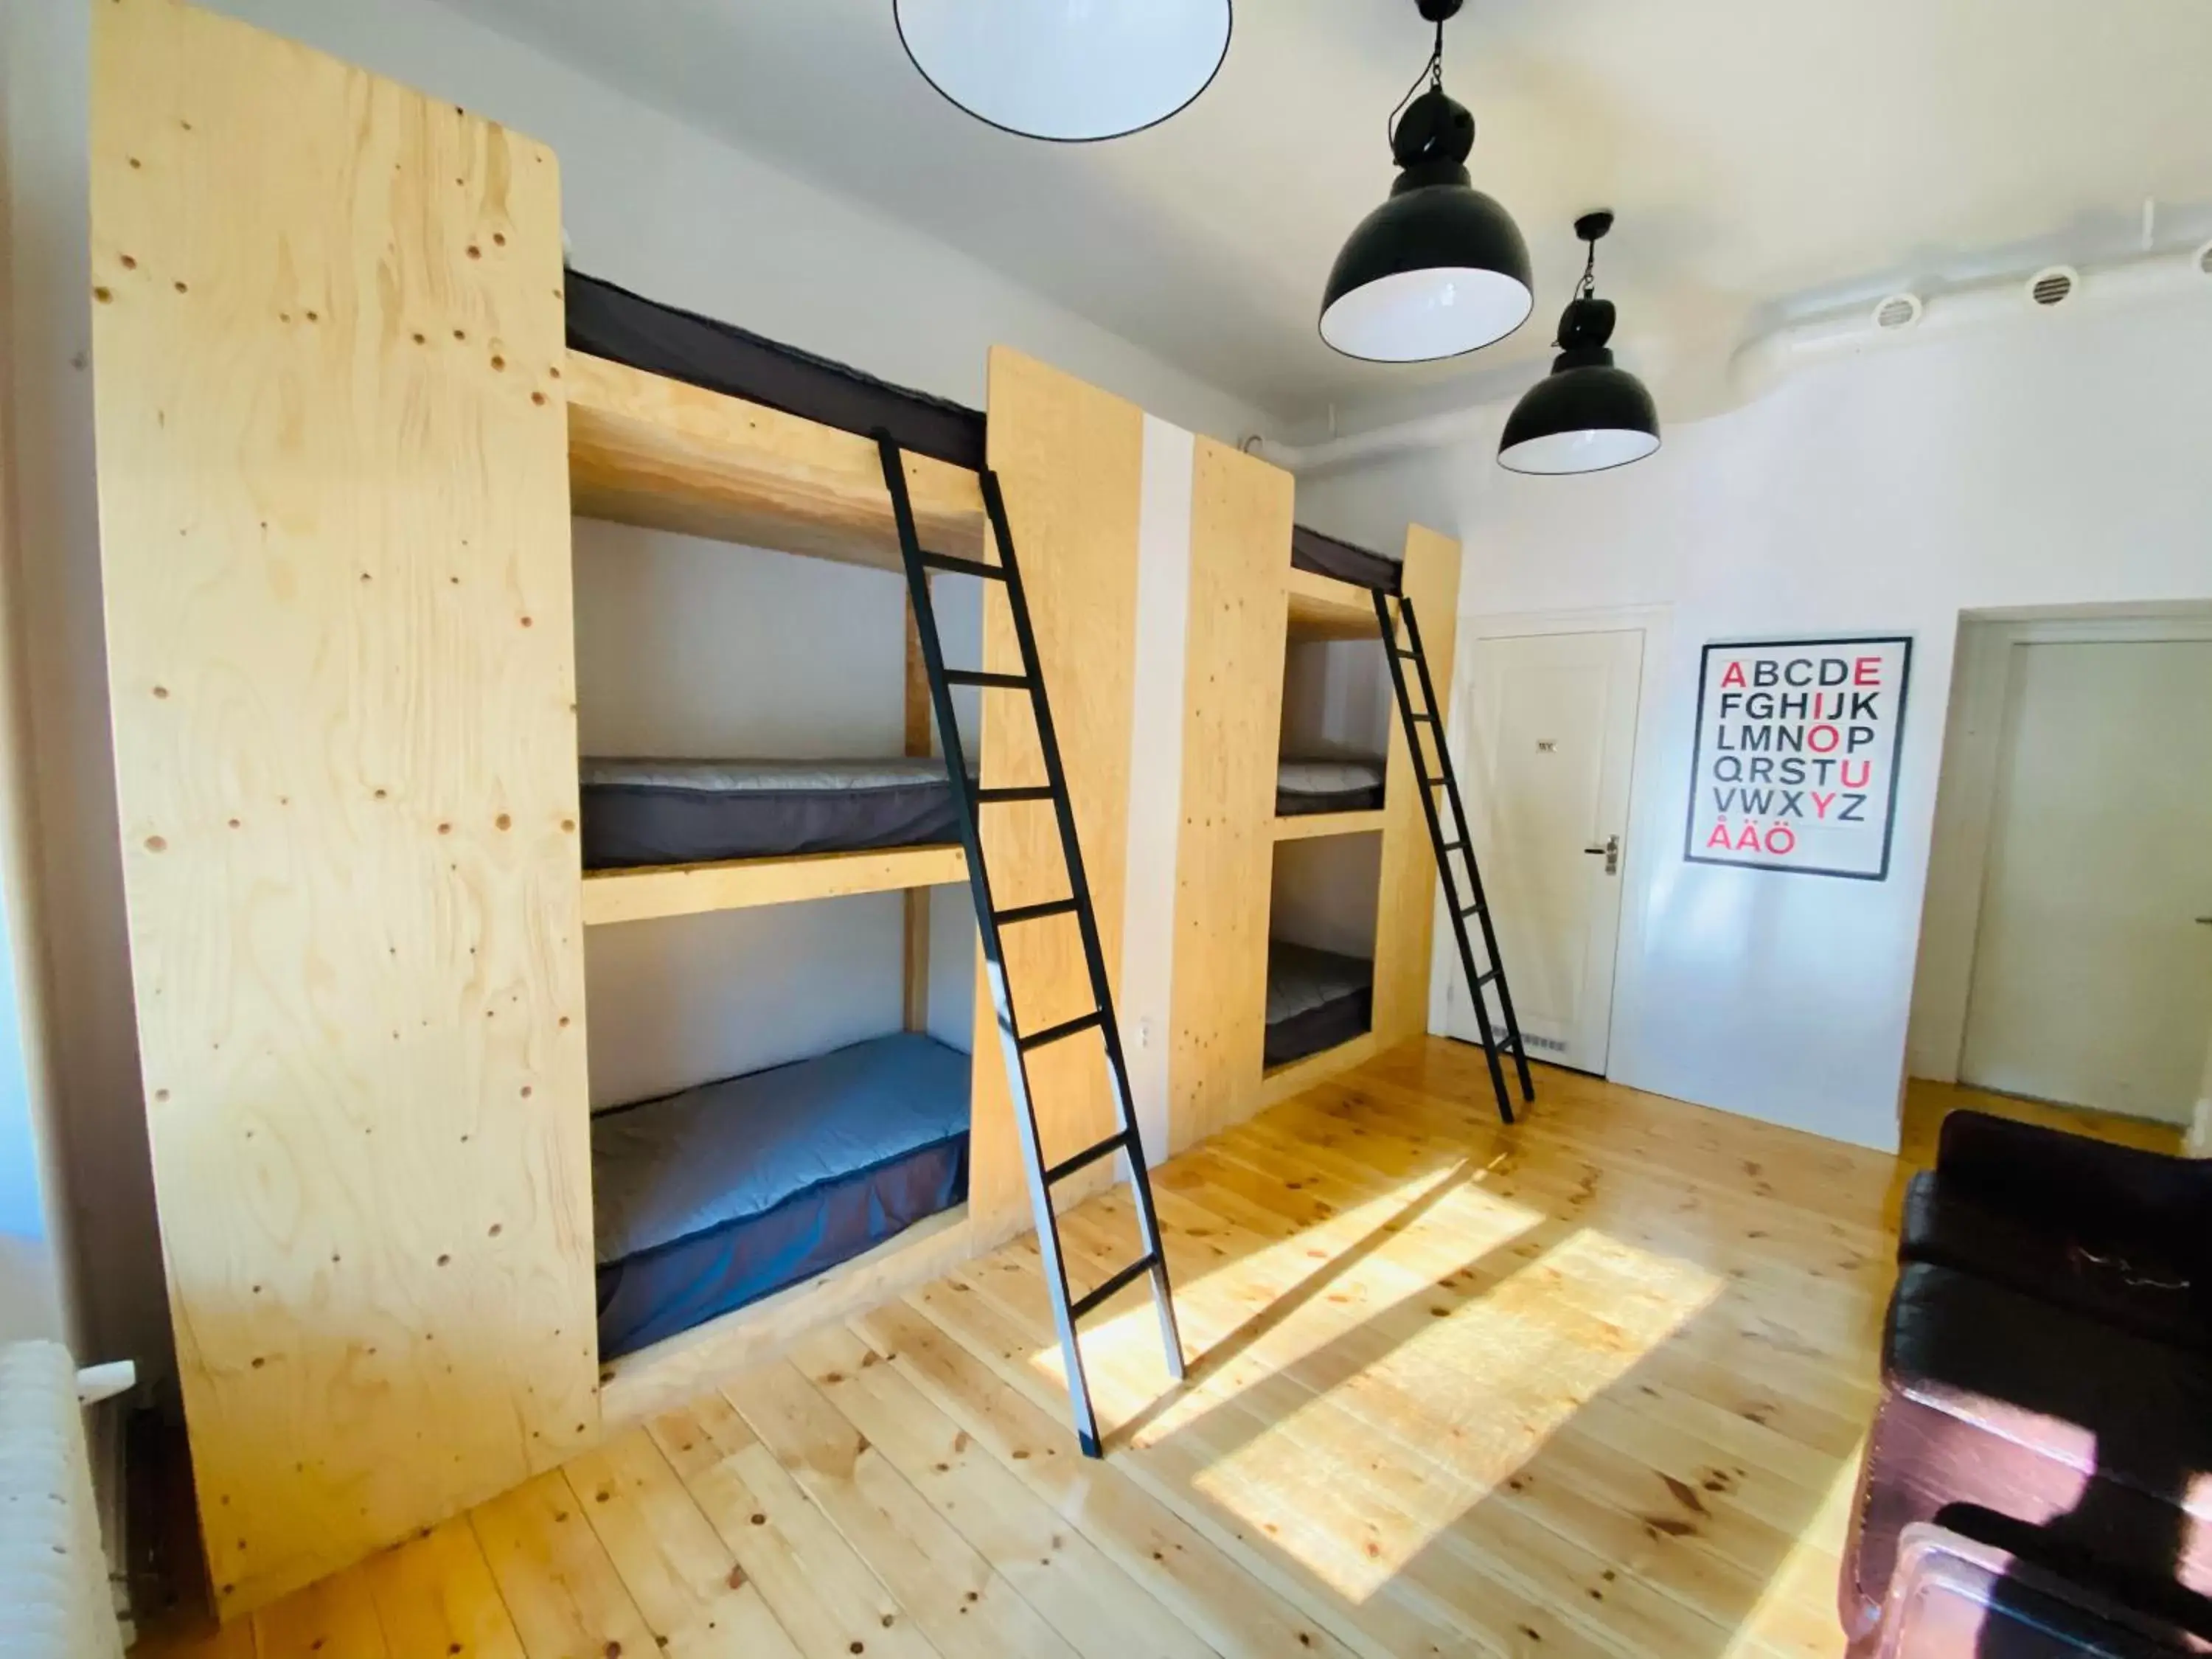 Shower, Bunk Bed in City Backpackers Hostel